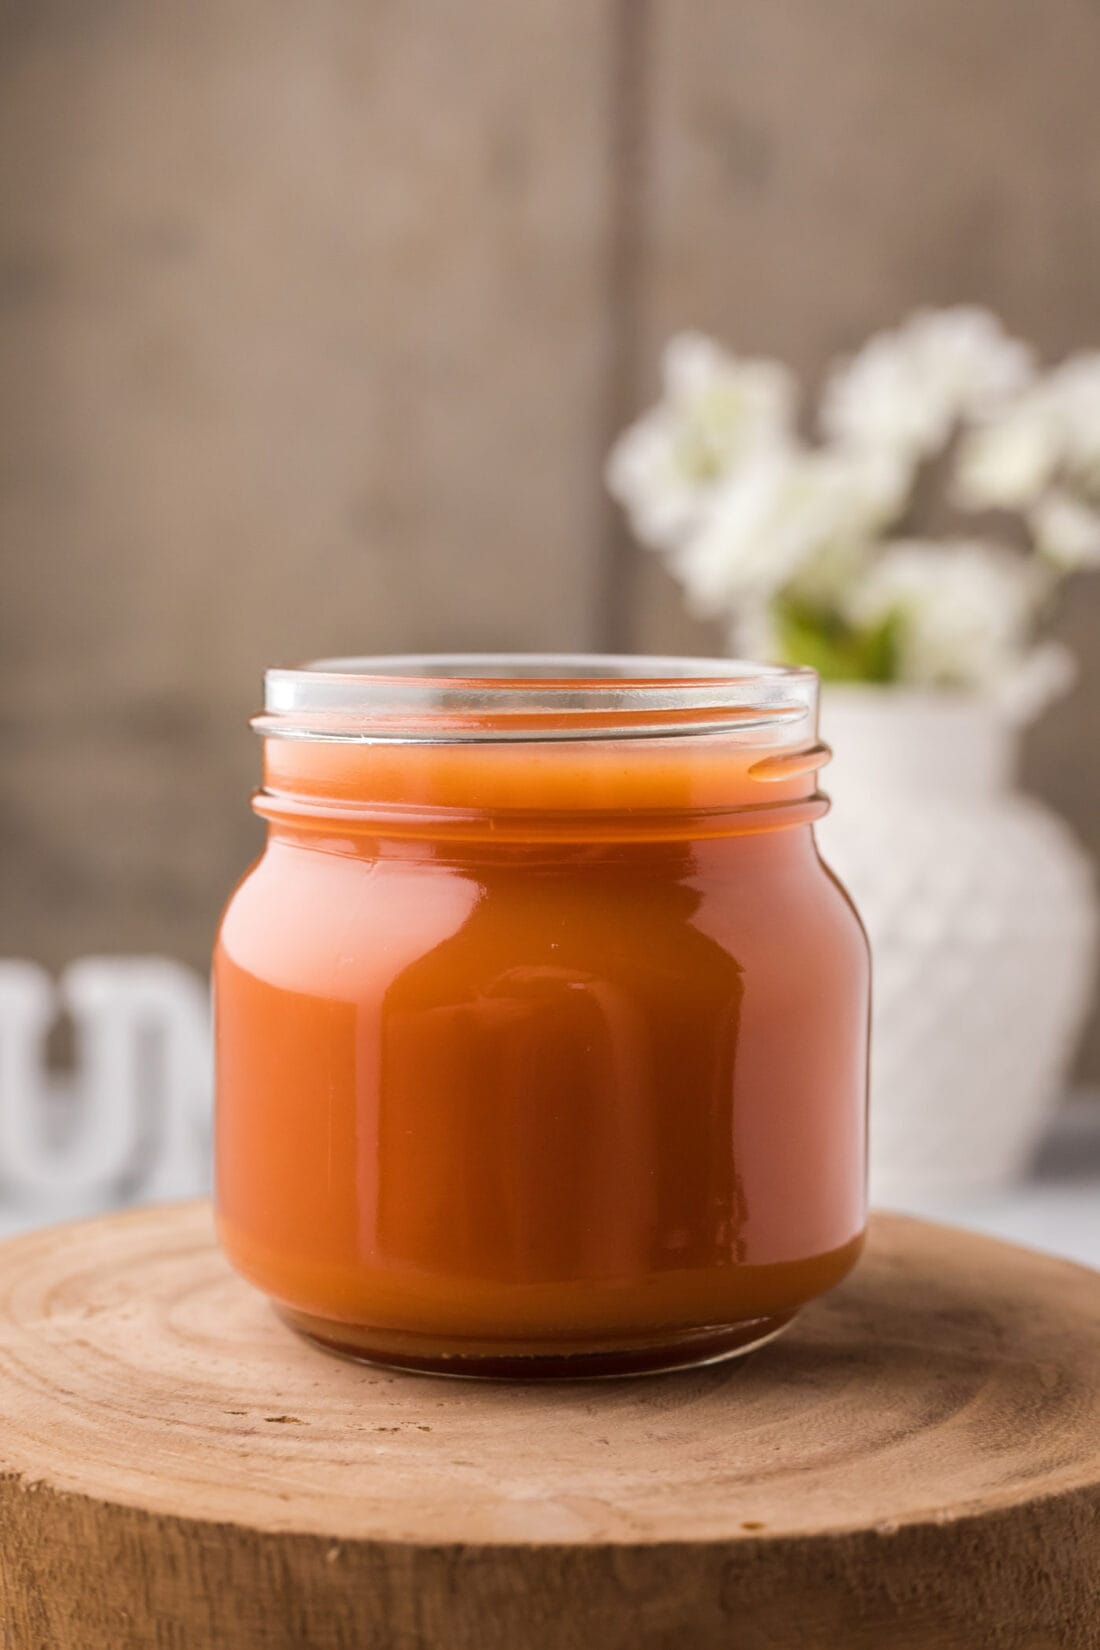 Jar of Sweet and Sour Sauce